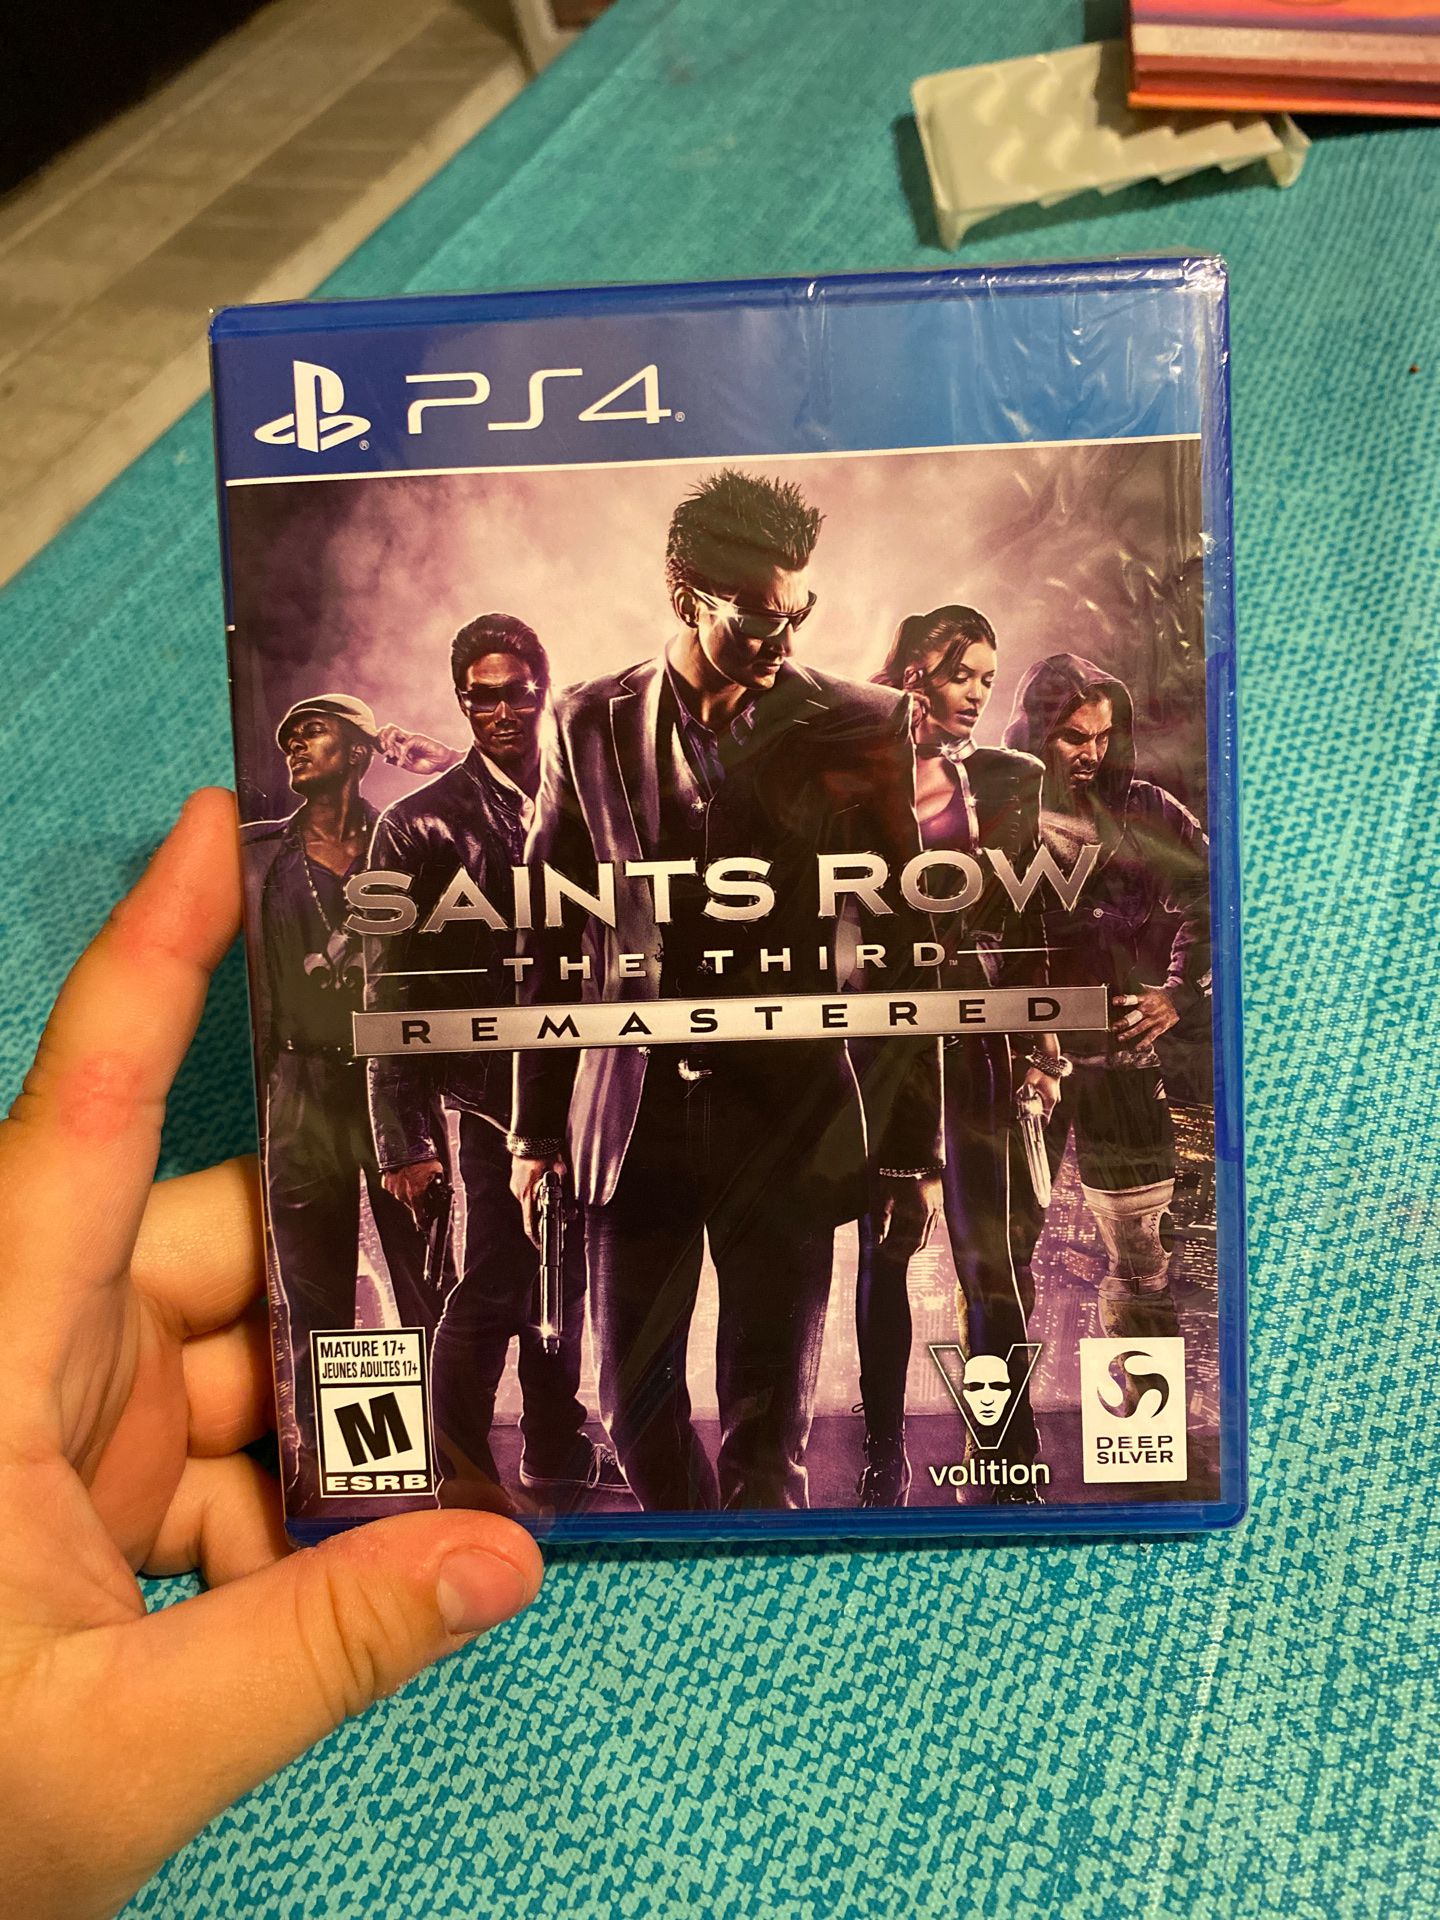 SAINTS ROW 3rd REMASTERED!!!!!!!!!!! PS4!!!